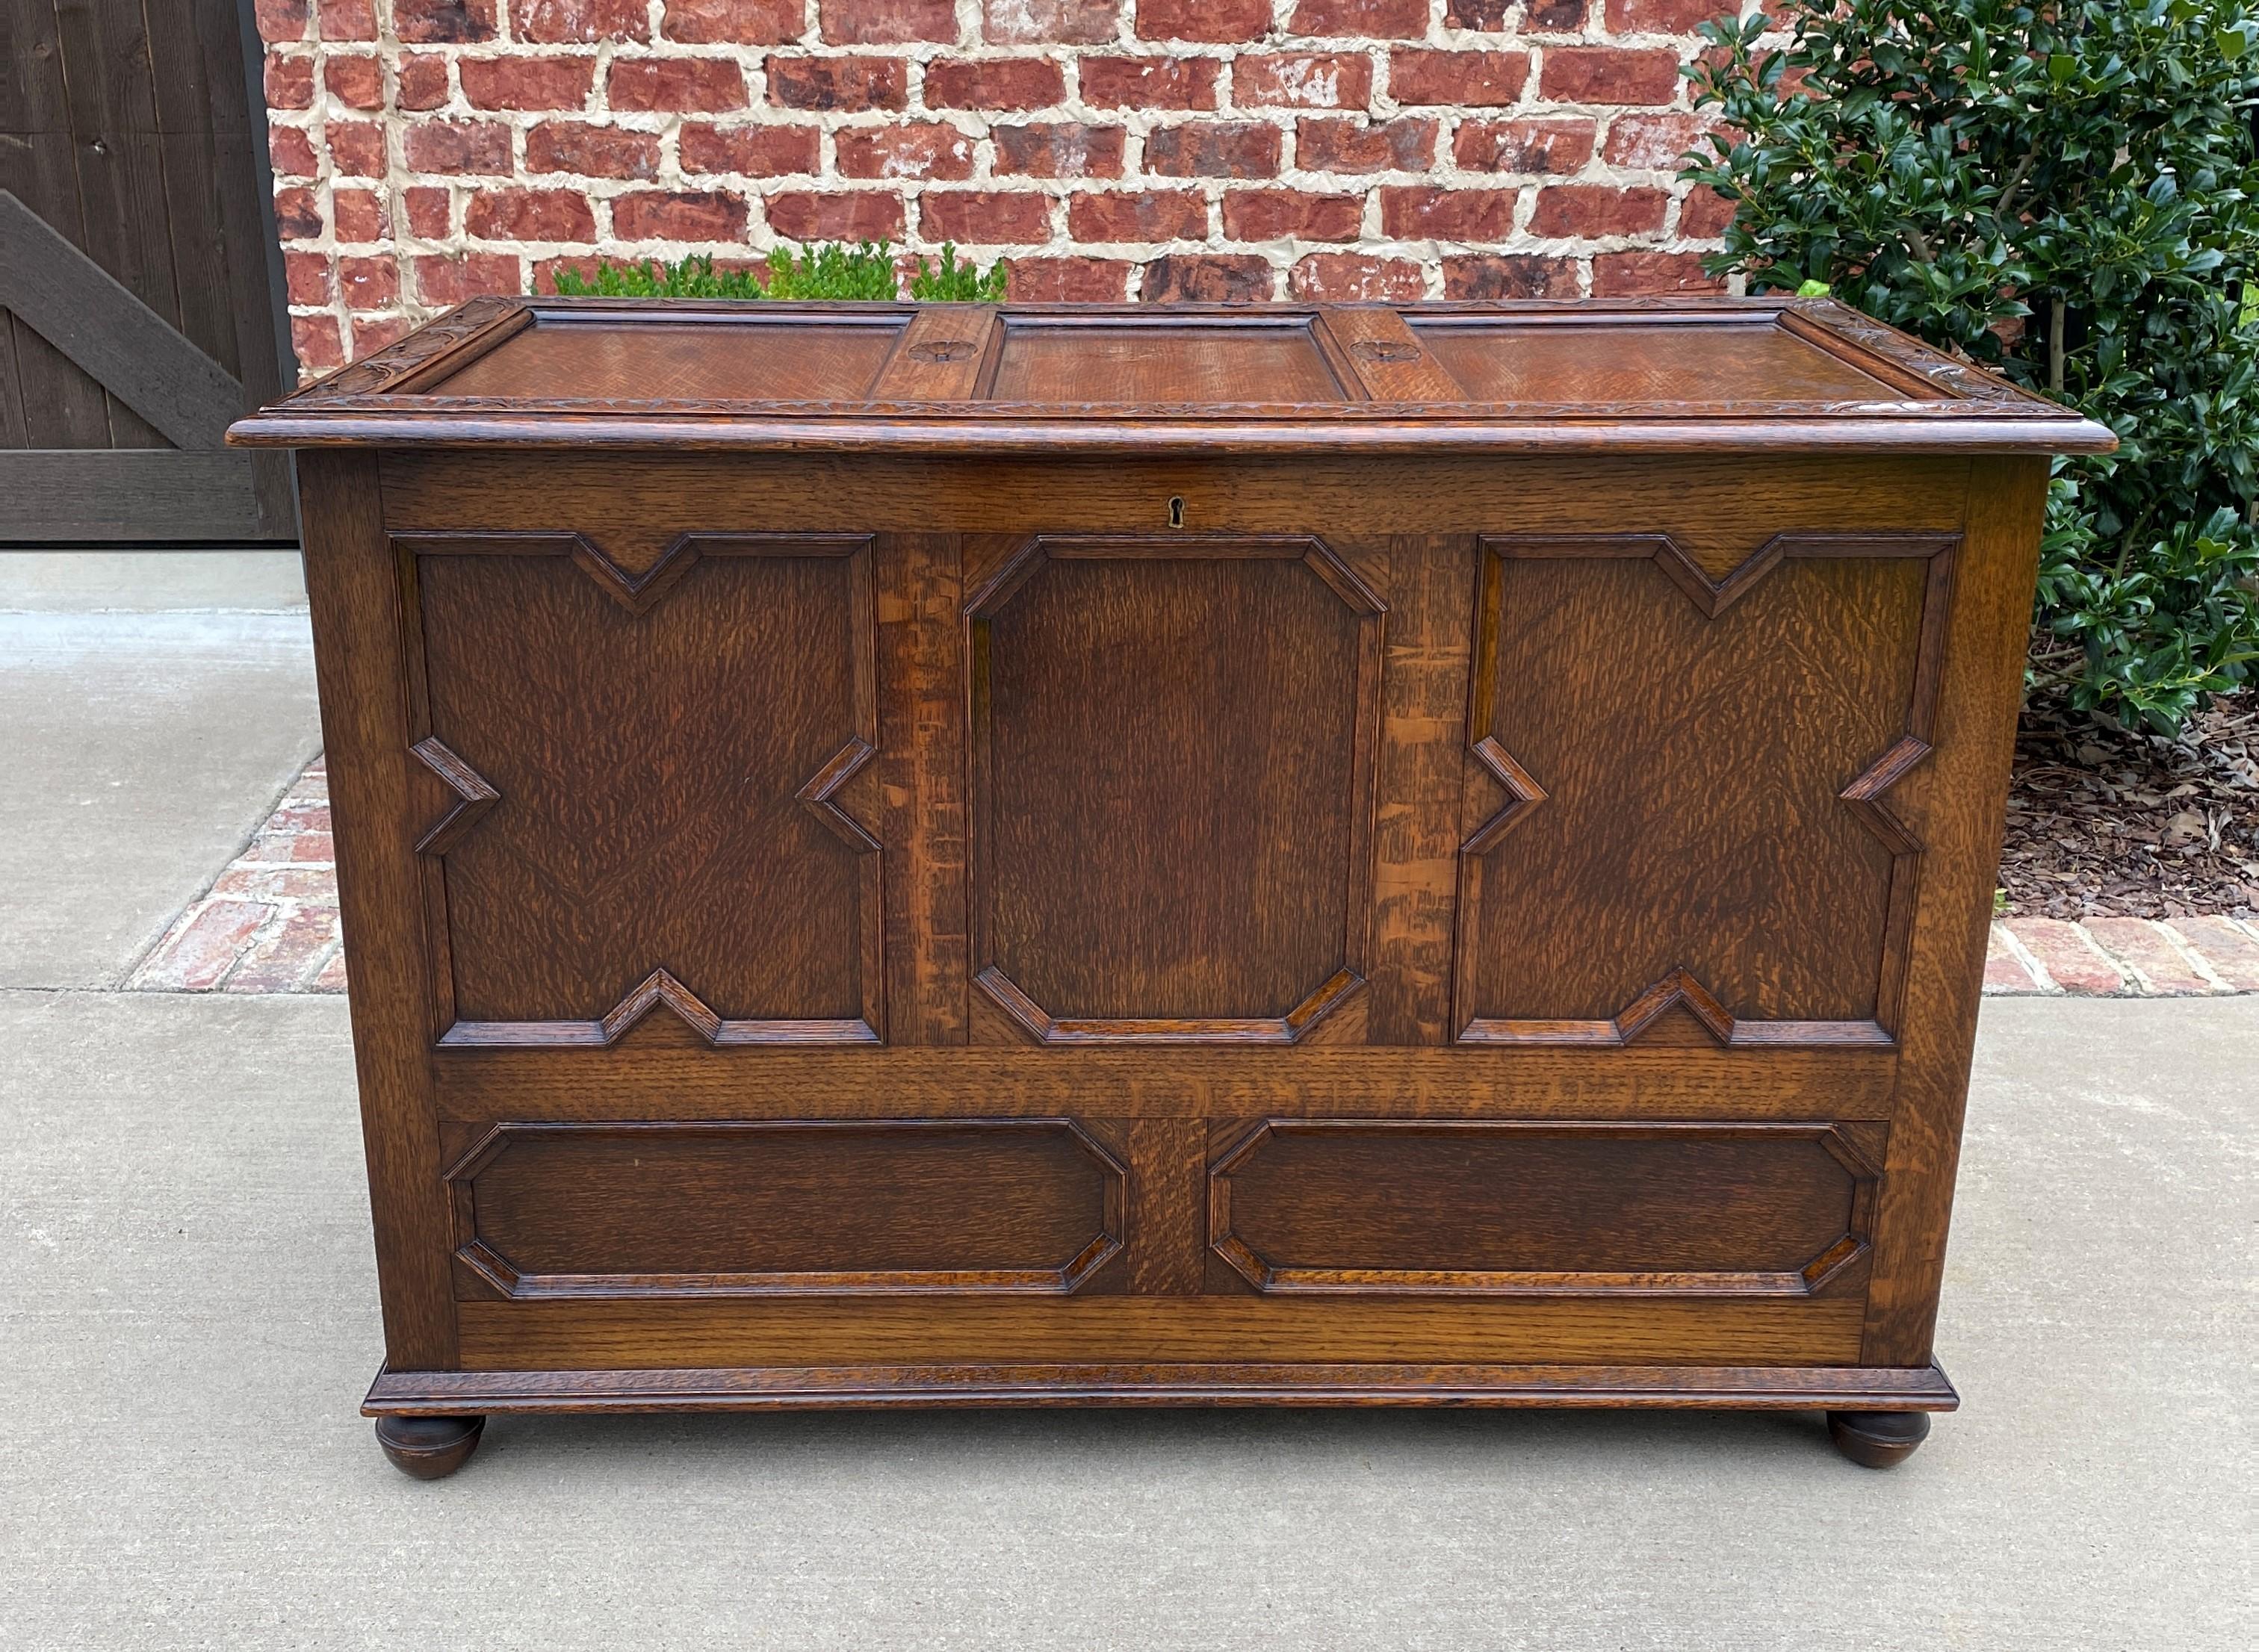 CHARMING Antique English Jacobean or Tudor Oak Blanket Box, Coffer, Trunk, Storage Chest or Bench~~c. 1920s

These chests were originally used as strongboxes for holding money, jewelry and other valuables. The perfect size for a foyer, entry hall or